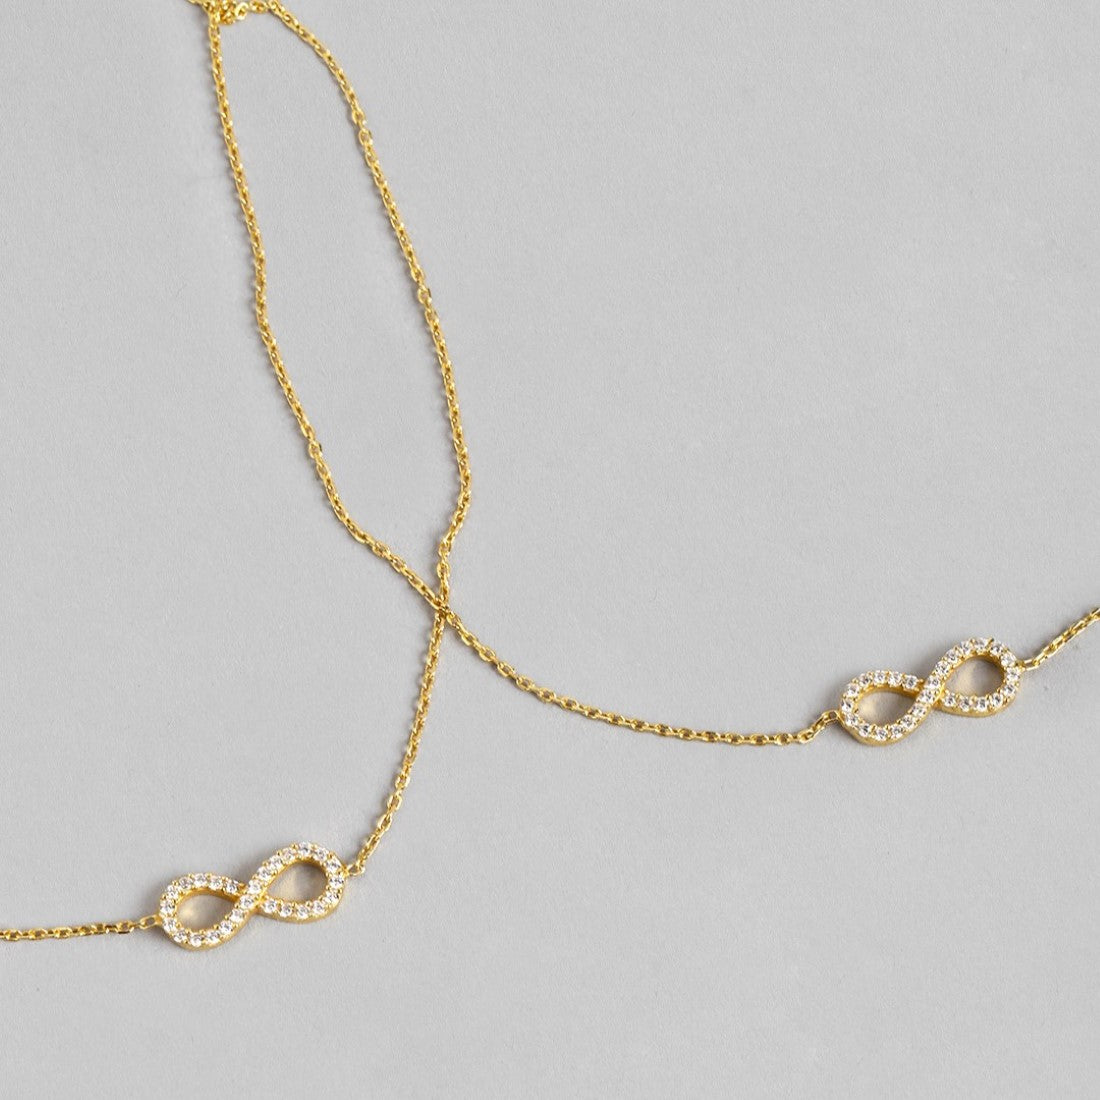 Infinite Glamour Gold-Plated 925 Sterling Silver Anklet with Cubic Zirconia